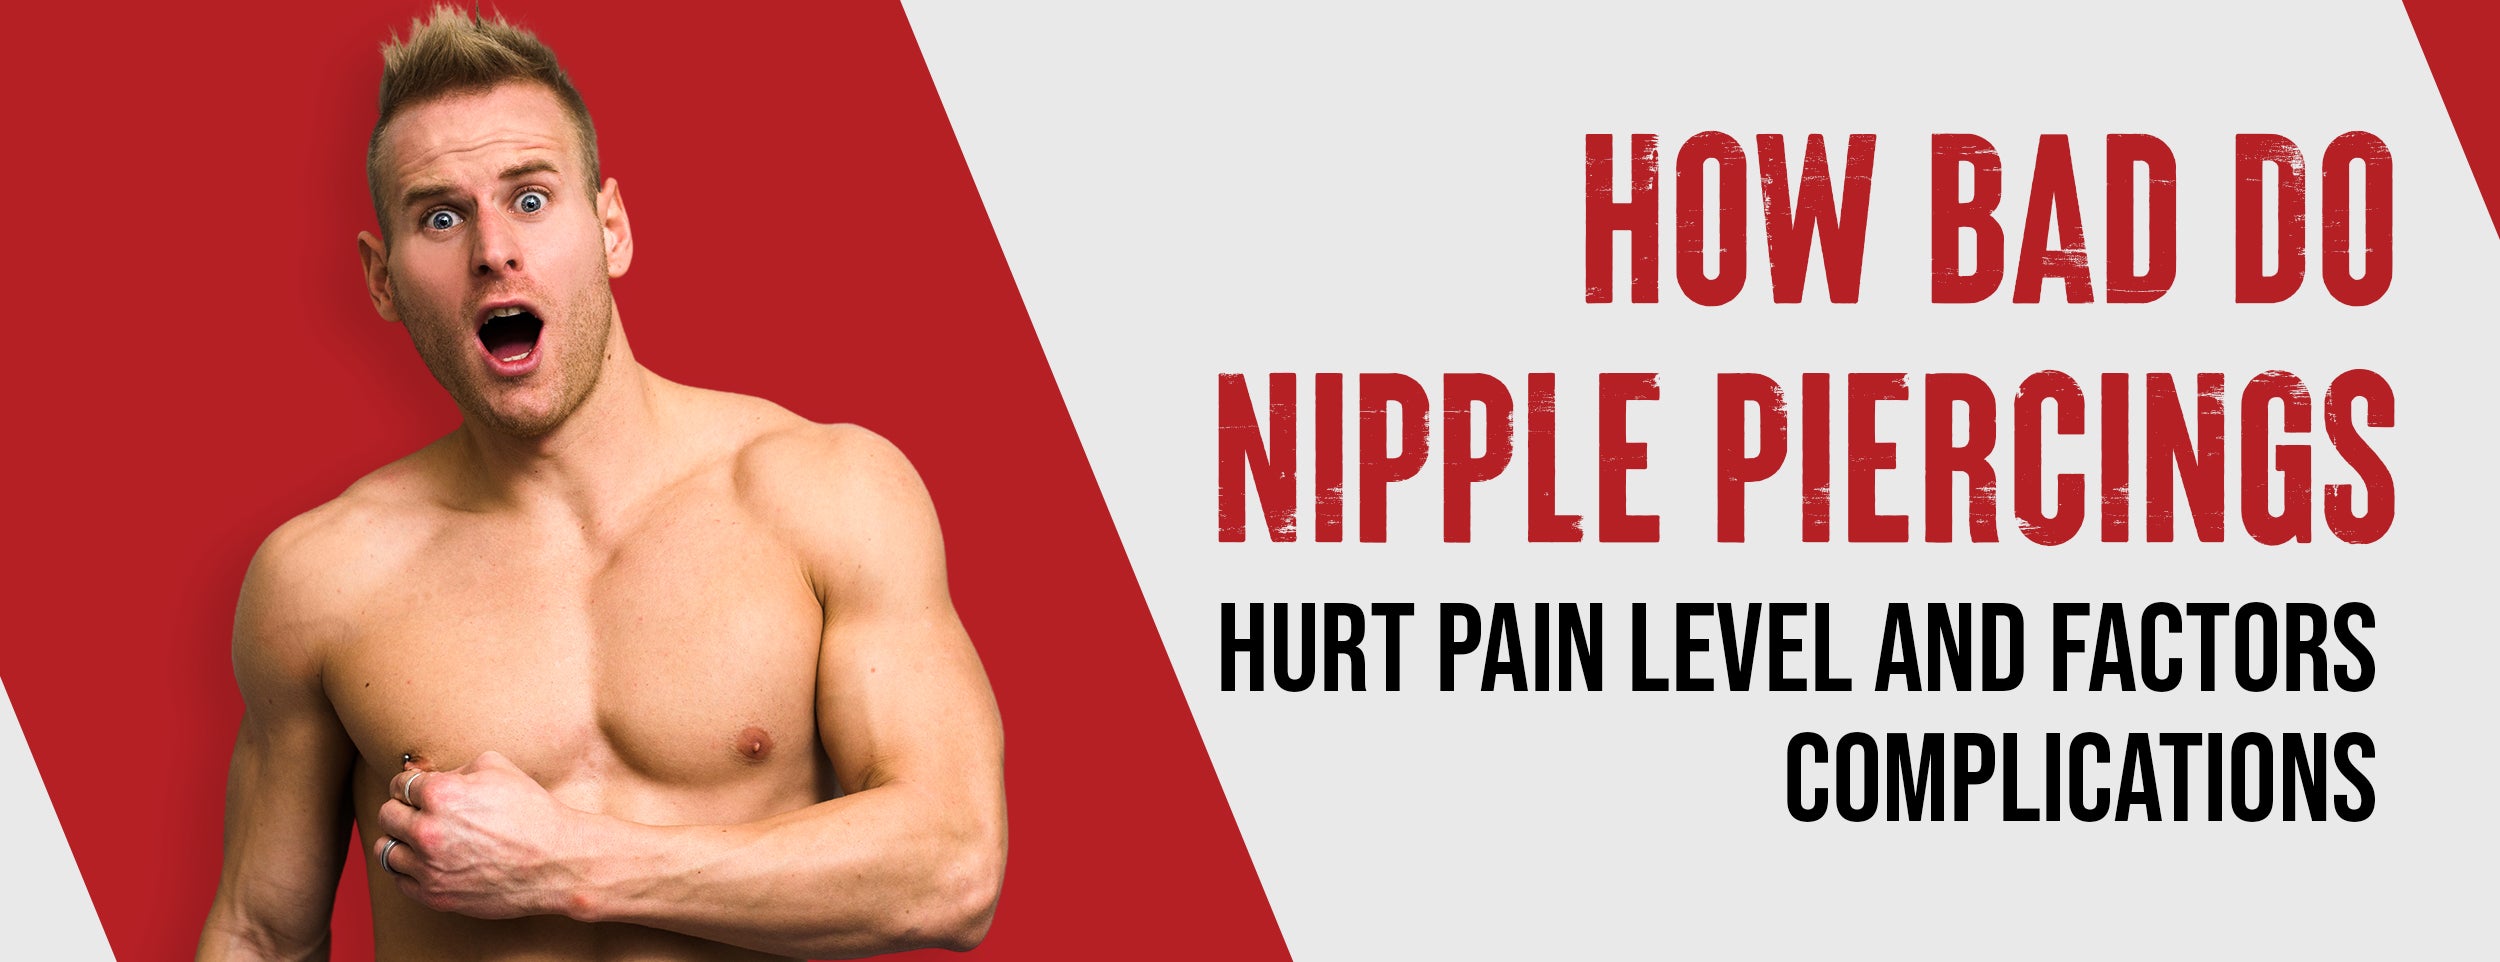 Pain Levels & Factors Related to Nipple Piercings